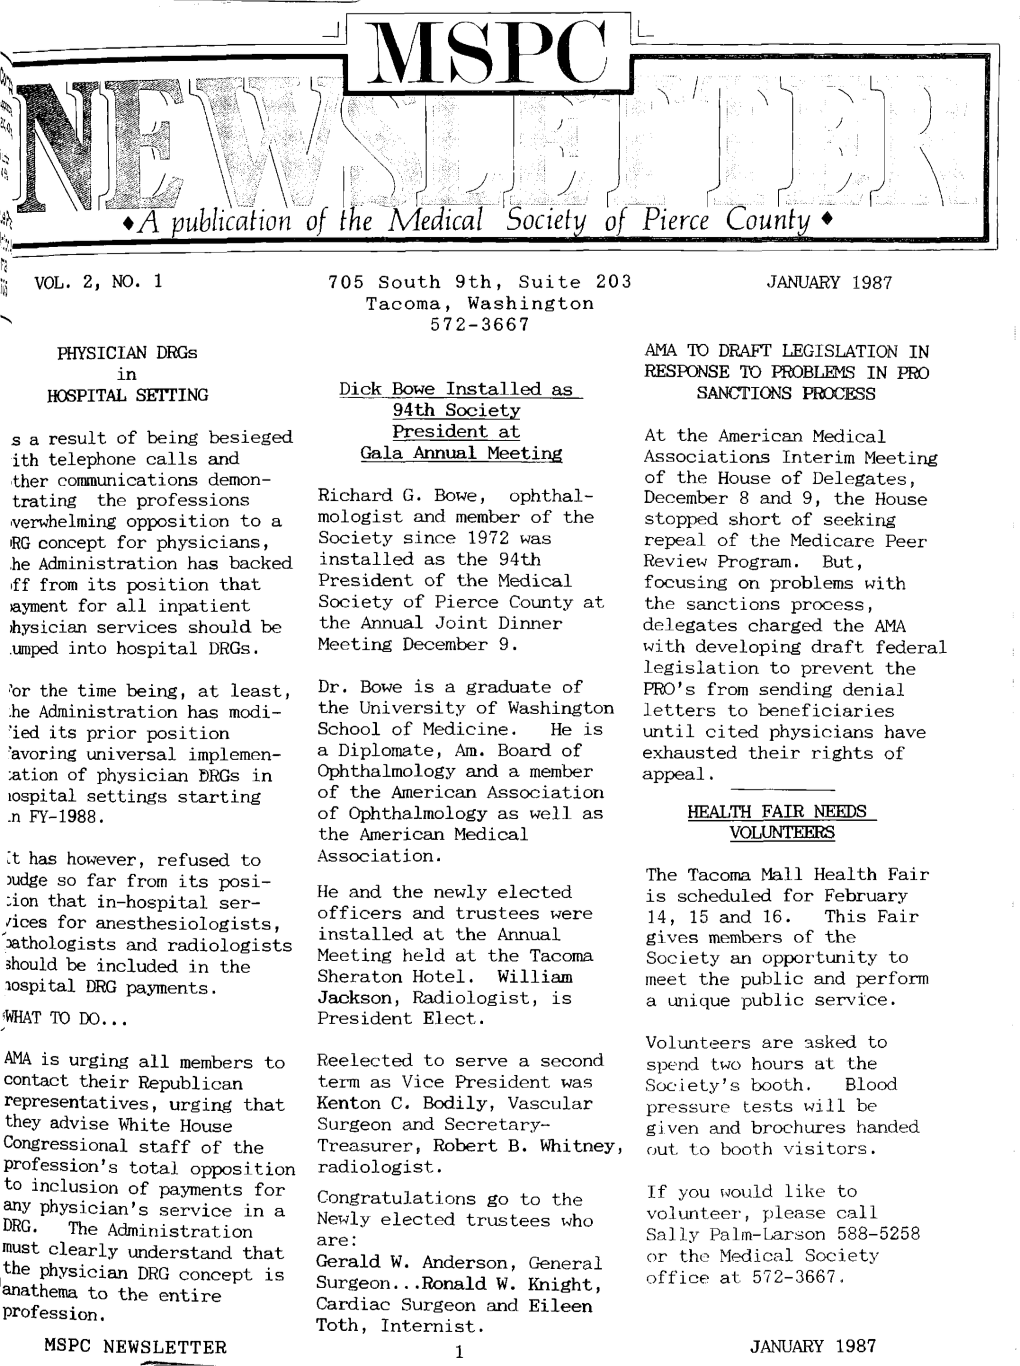 The Bulletin Medical Society of Pierce County/MSPC Newsletter 1987